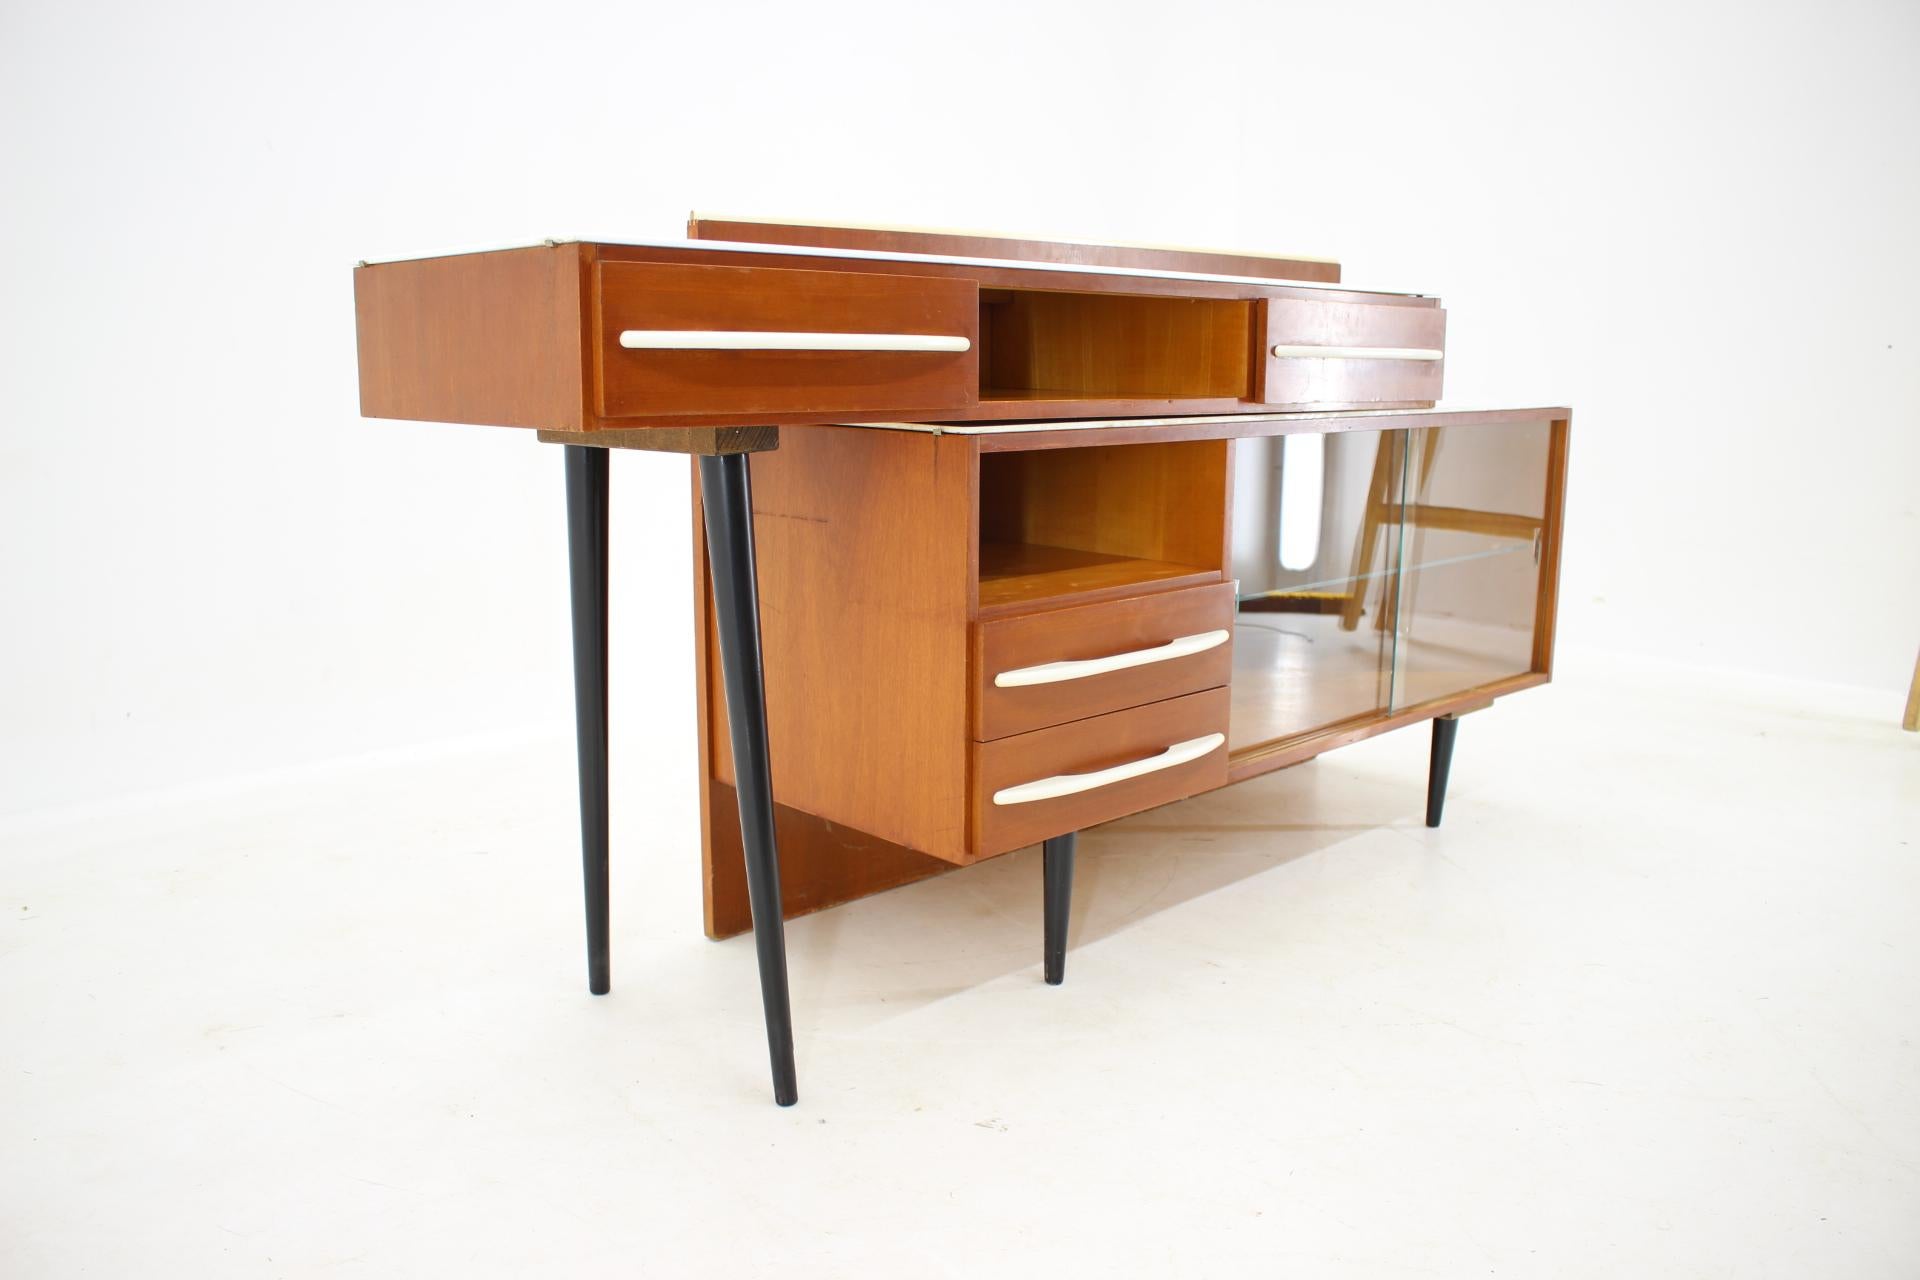 1960s M.Pozar Modular Set of Desk and Chest of Drawers, Czechoslovakia For Sale 1